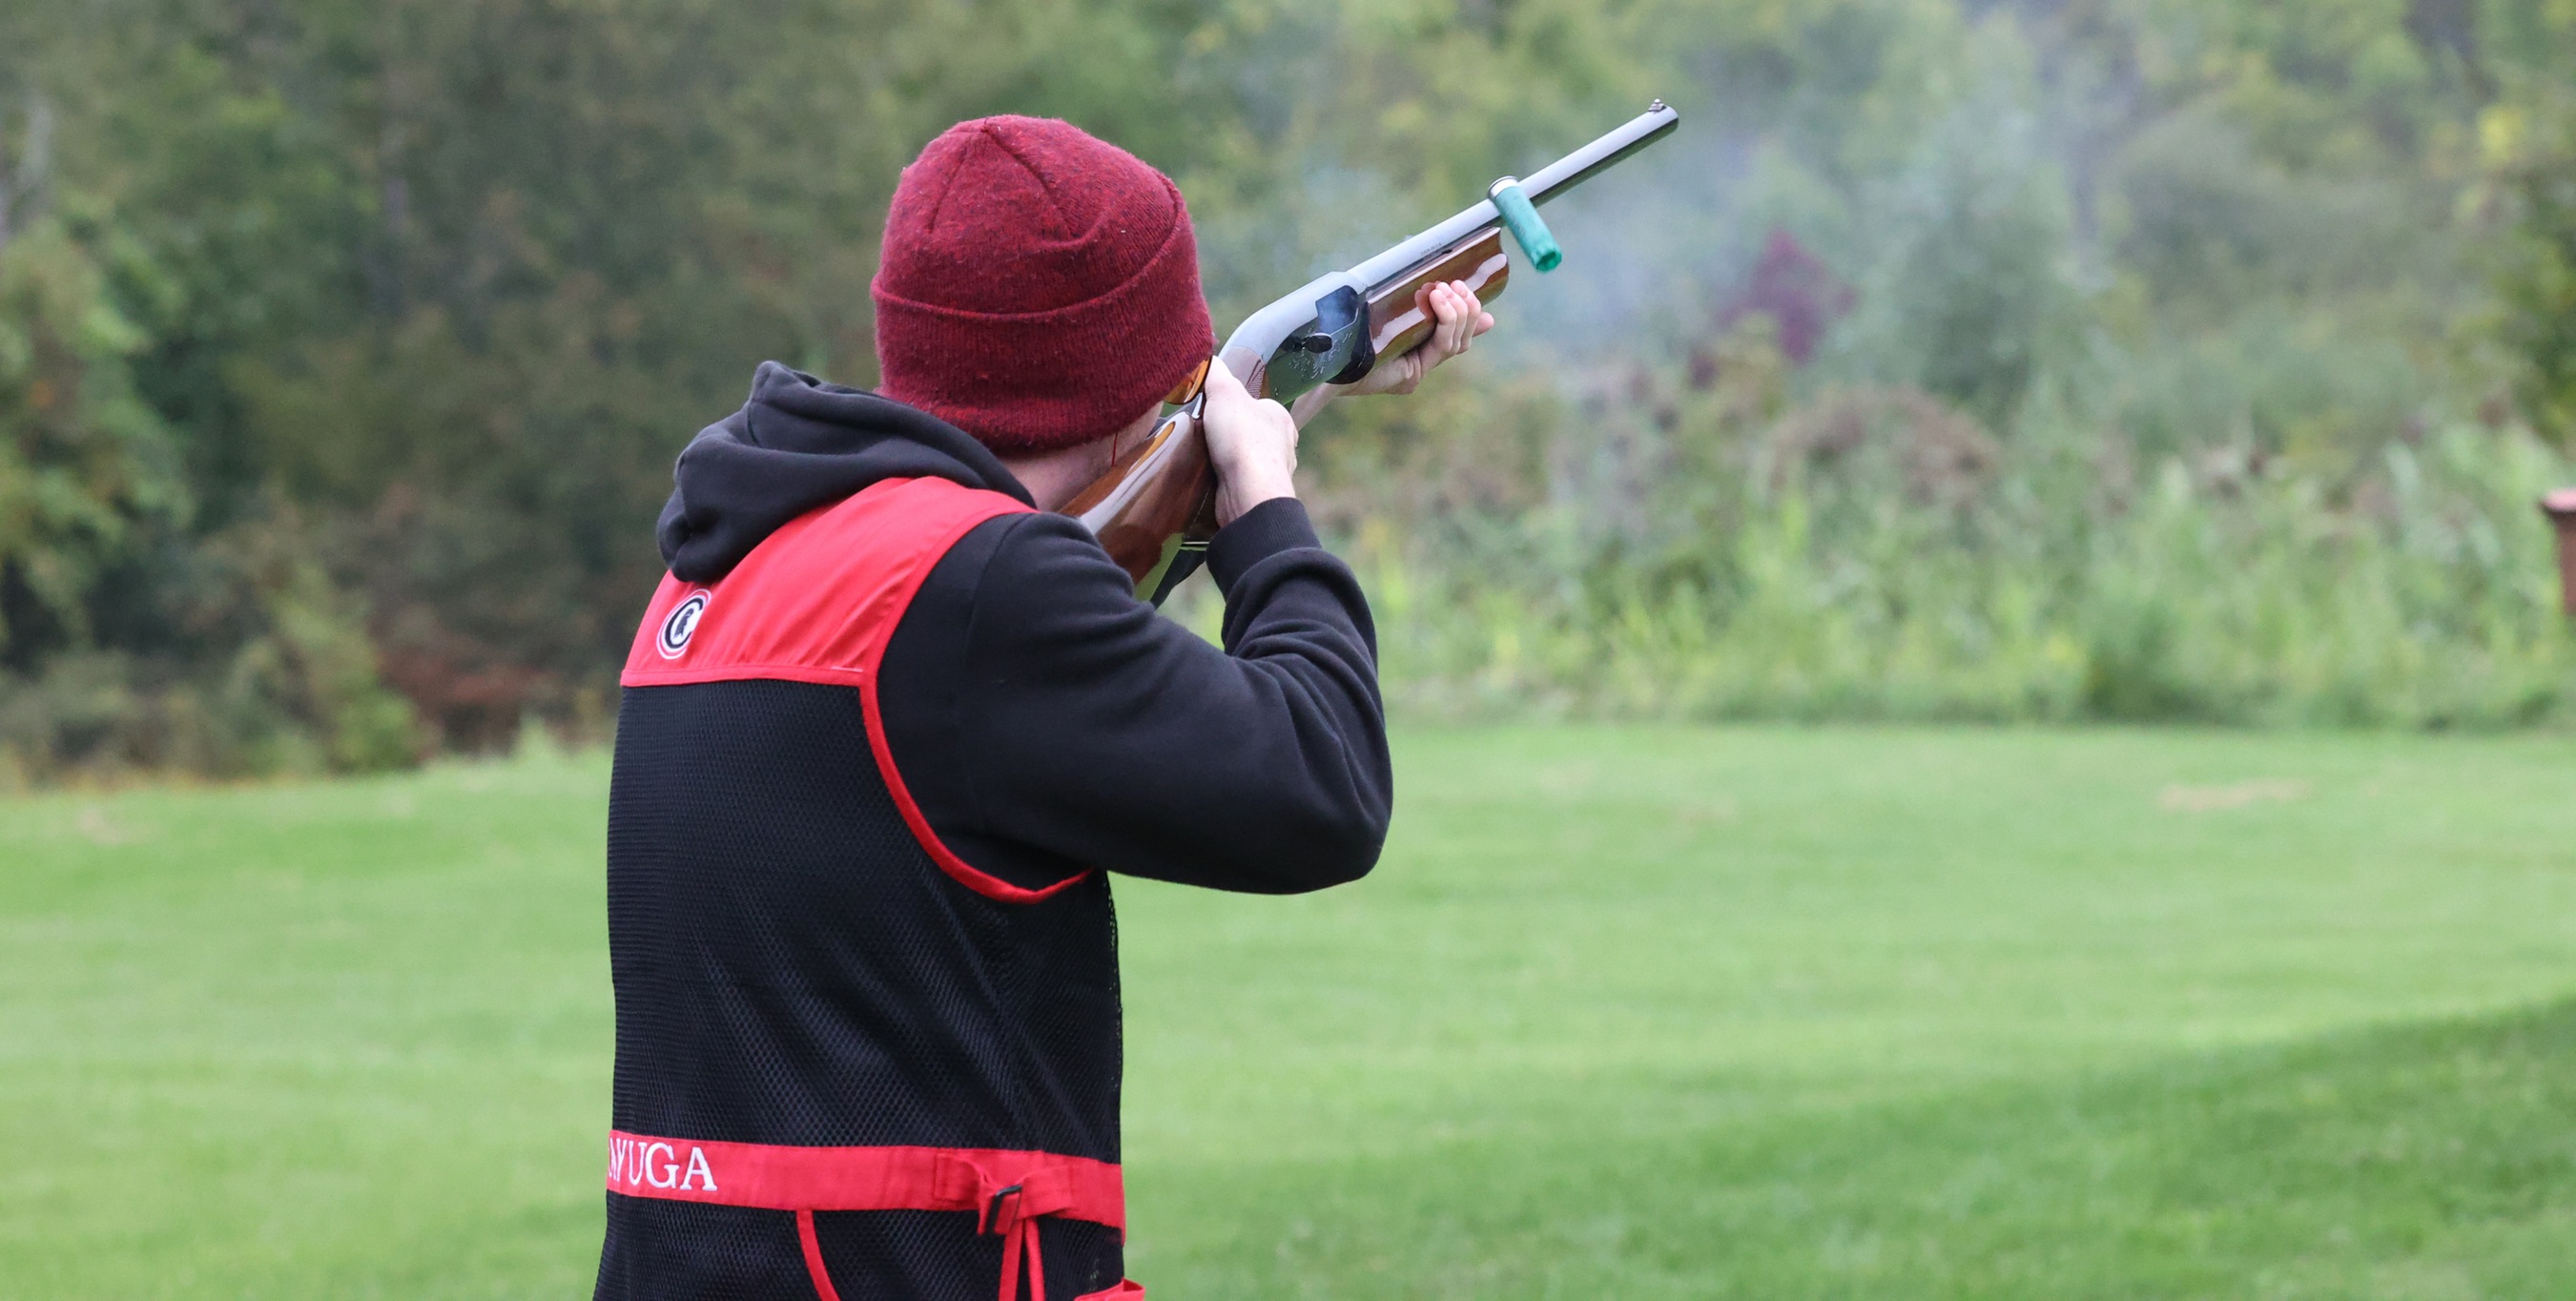 The Spartans Clay Target team will shoot in the national competition on Nov. 5.